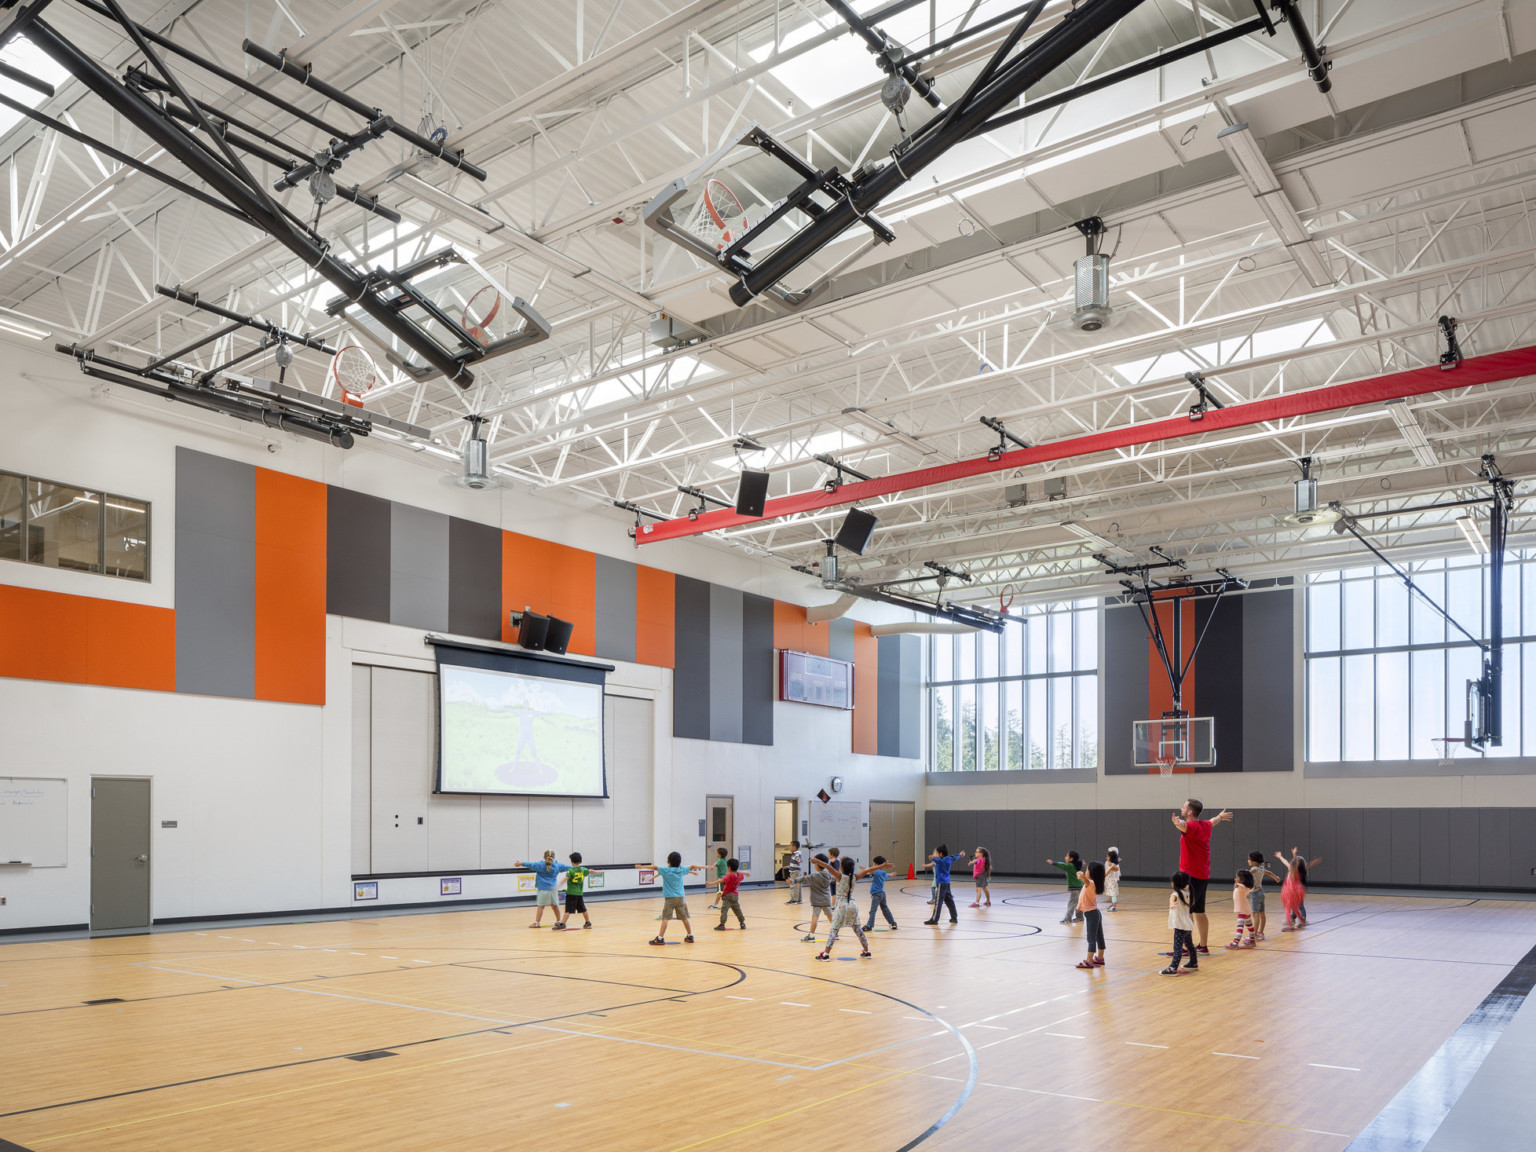 Double height gymnasium with exposed beams above. Wood basketball court with hoops raised. Projector screen at center left